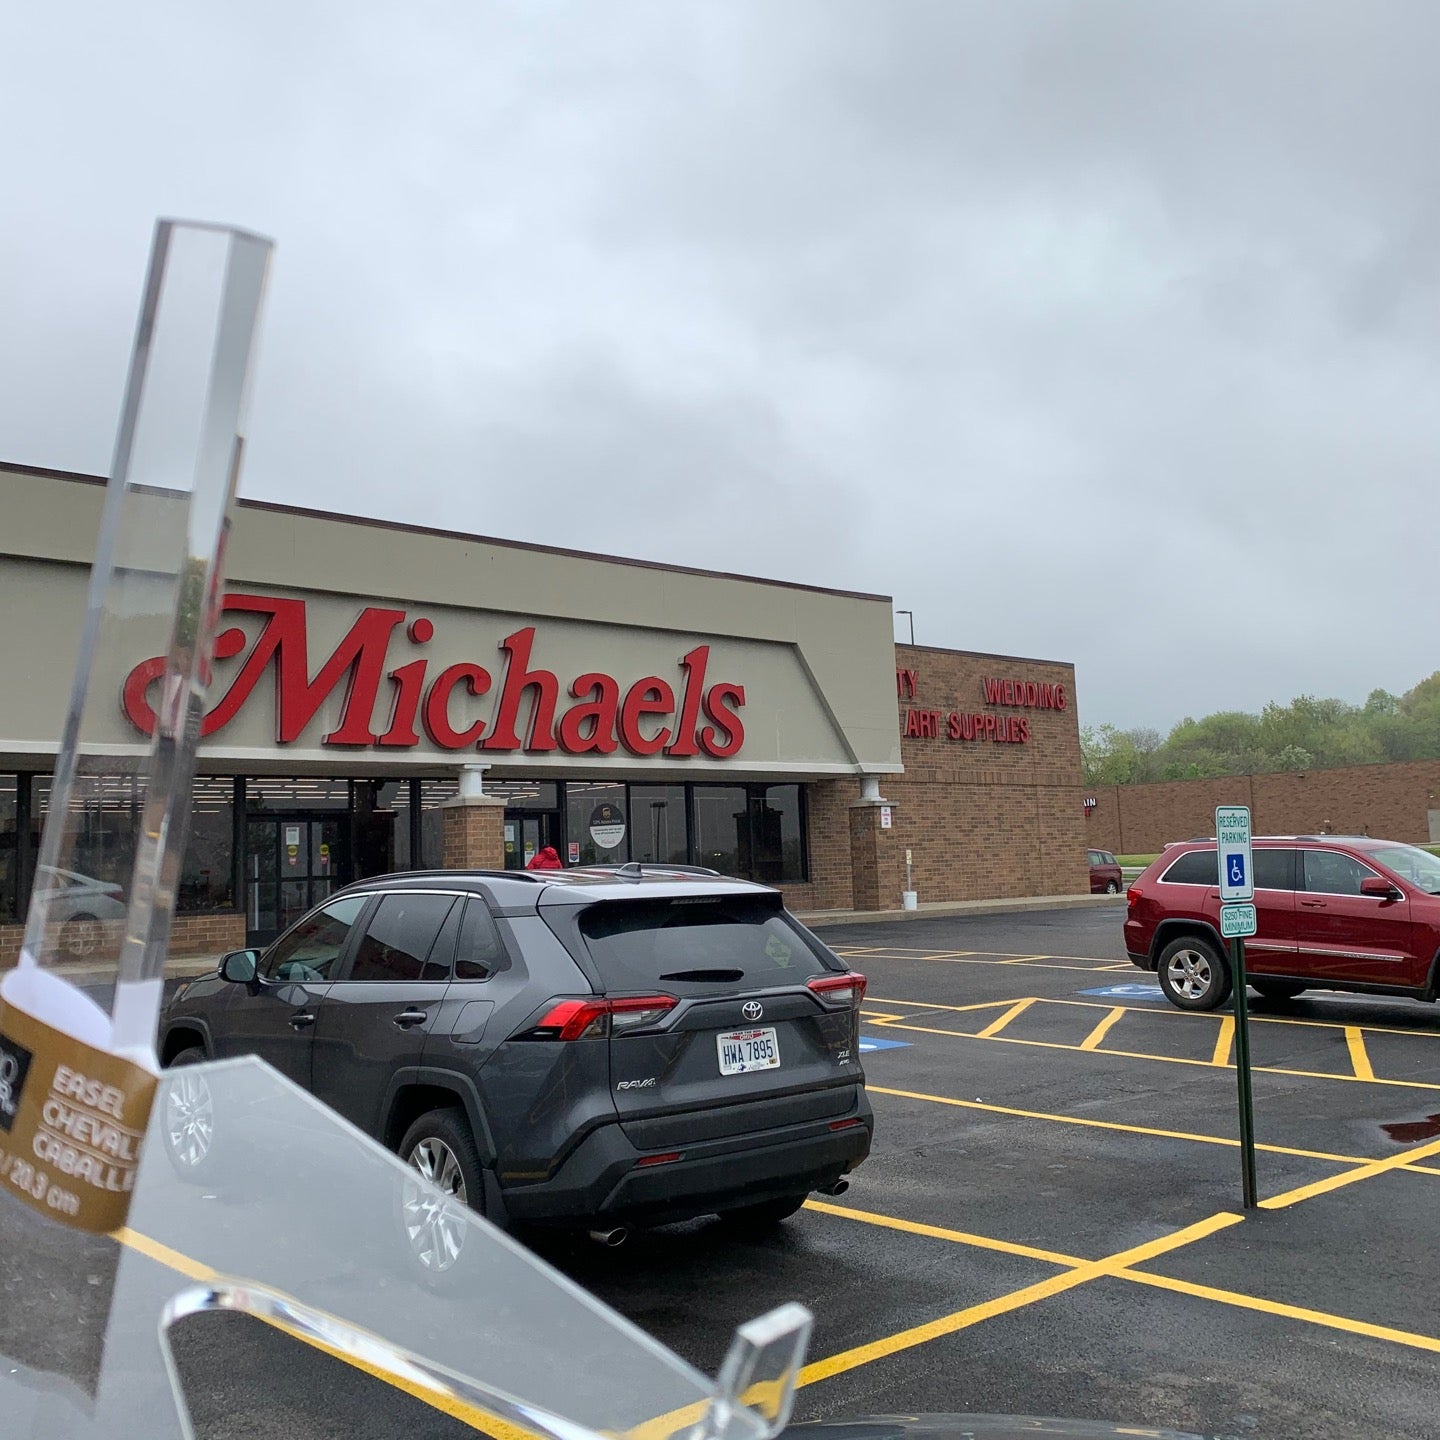 Michaels - The Arts & Crafts Store - Cuyahoga Falls, OH 44221